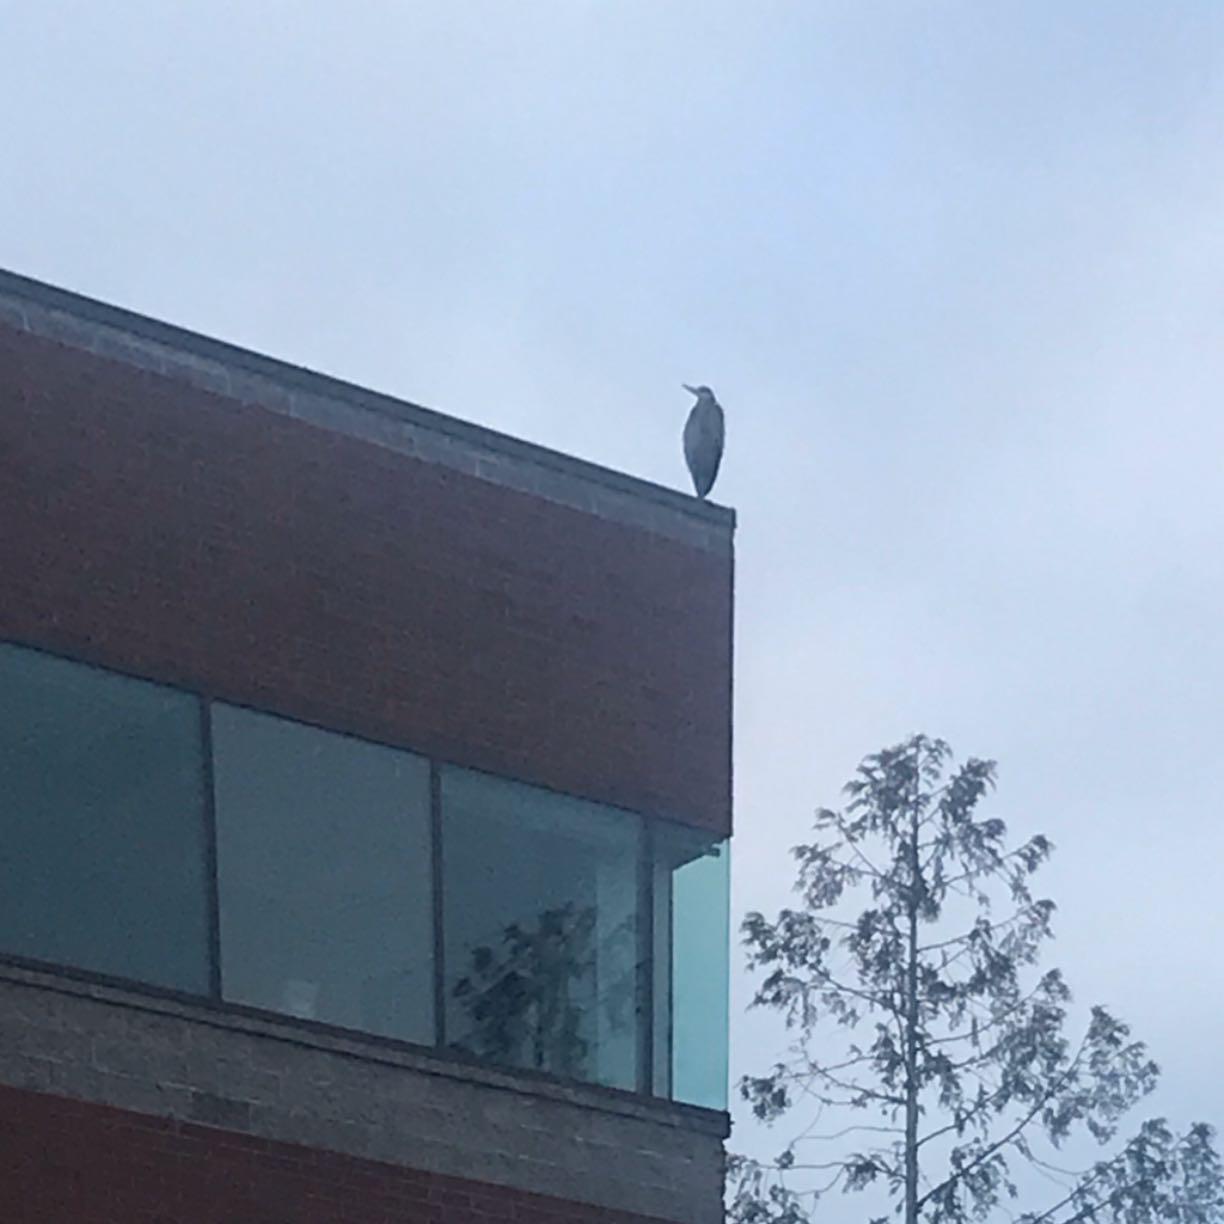 Great Blue Heron perched right above our offices today for a great vantage point. Maybe you could benefit from an overview as well?